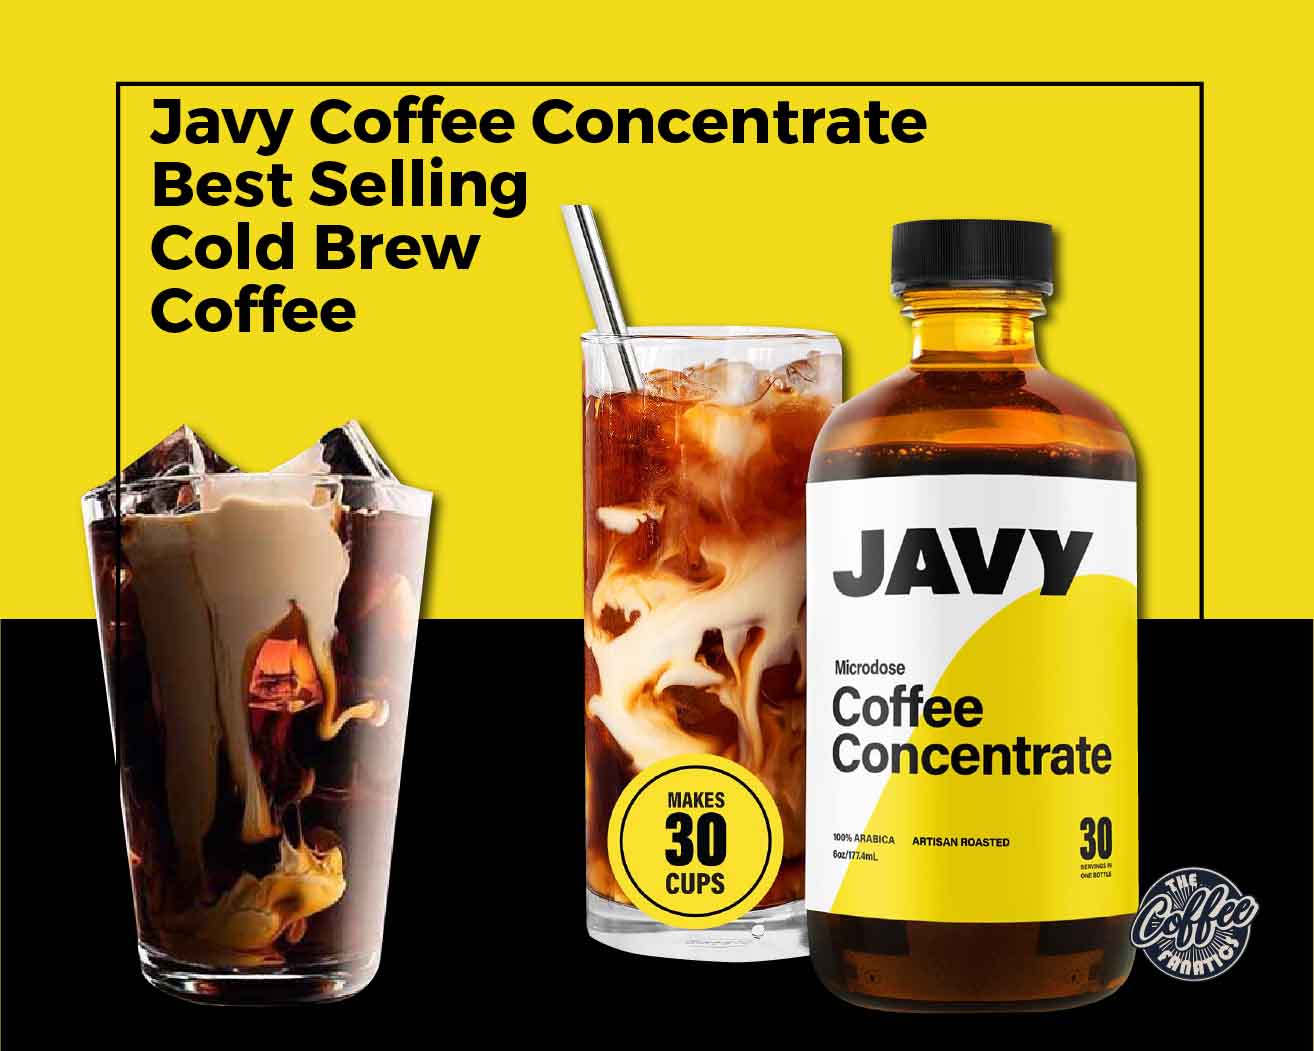 Javy Coffee Concentrate | Best Selling Concentrated Cold Brew Coffee